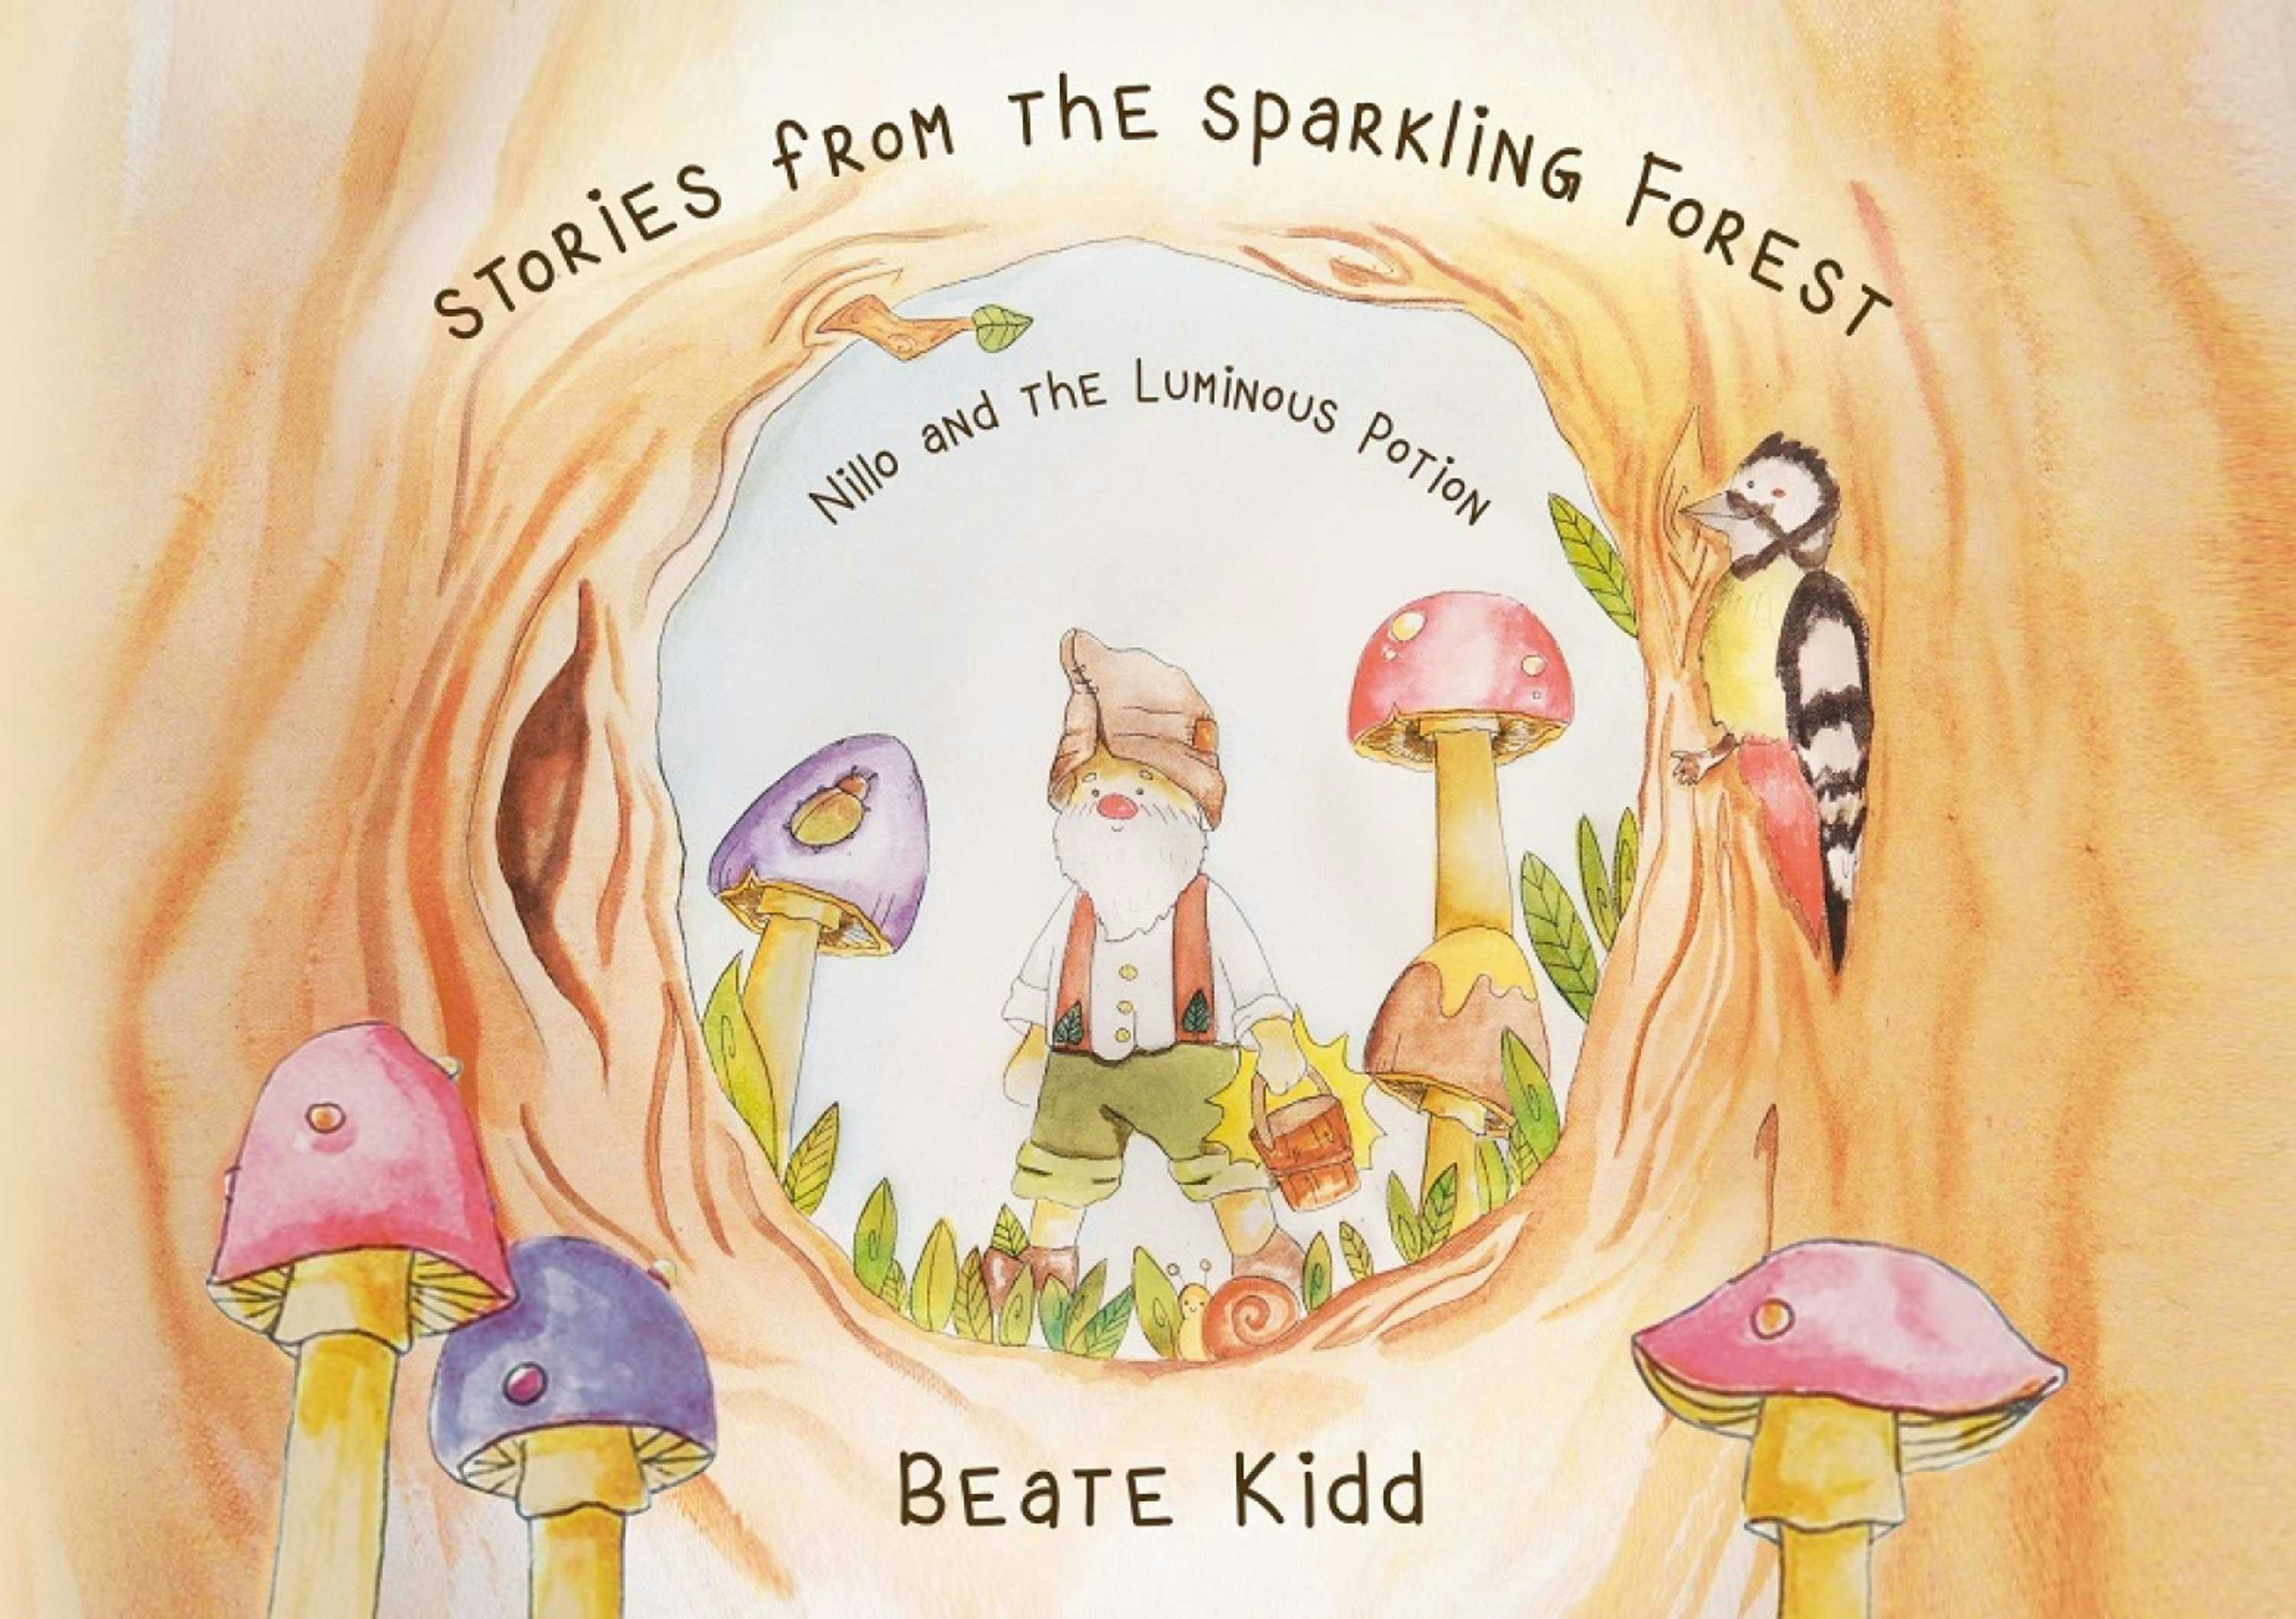 Stories from the Sparkling Forest - Nillo and the Luminous Potion - Beate Kidd, Katharina Anna Haney